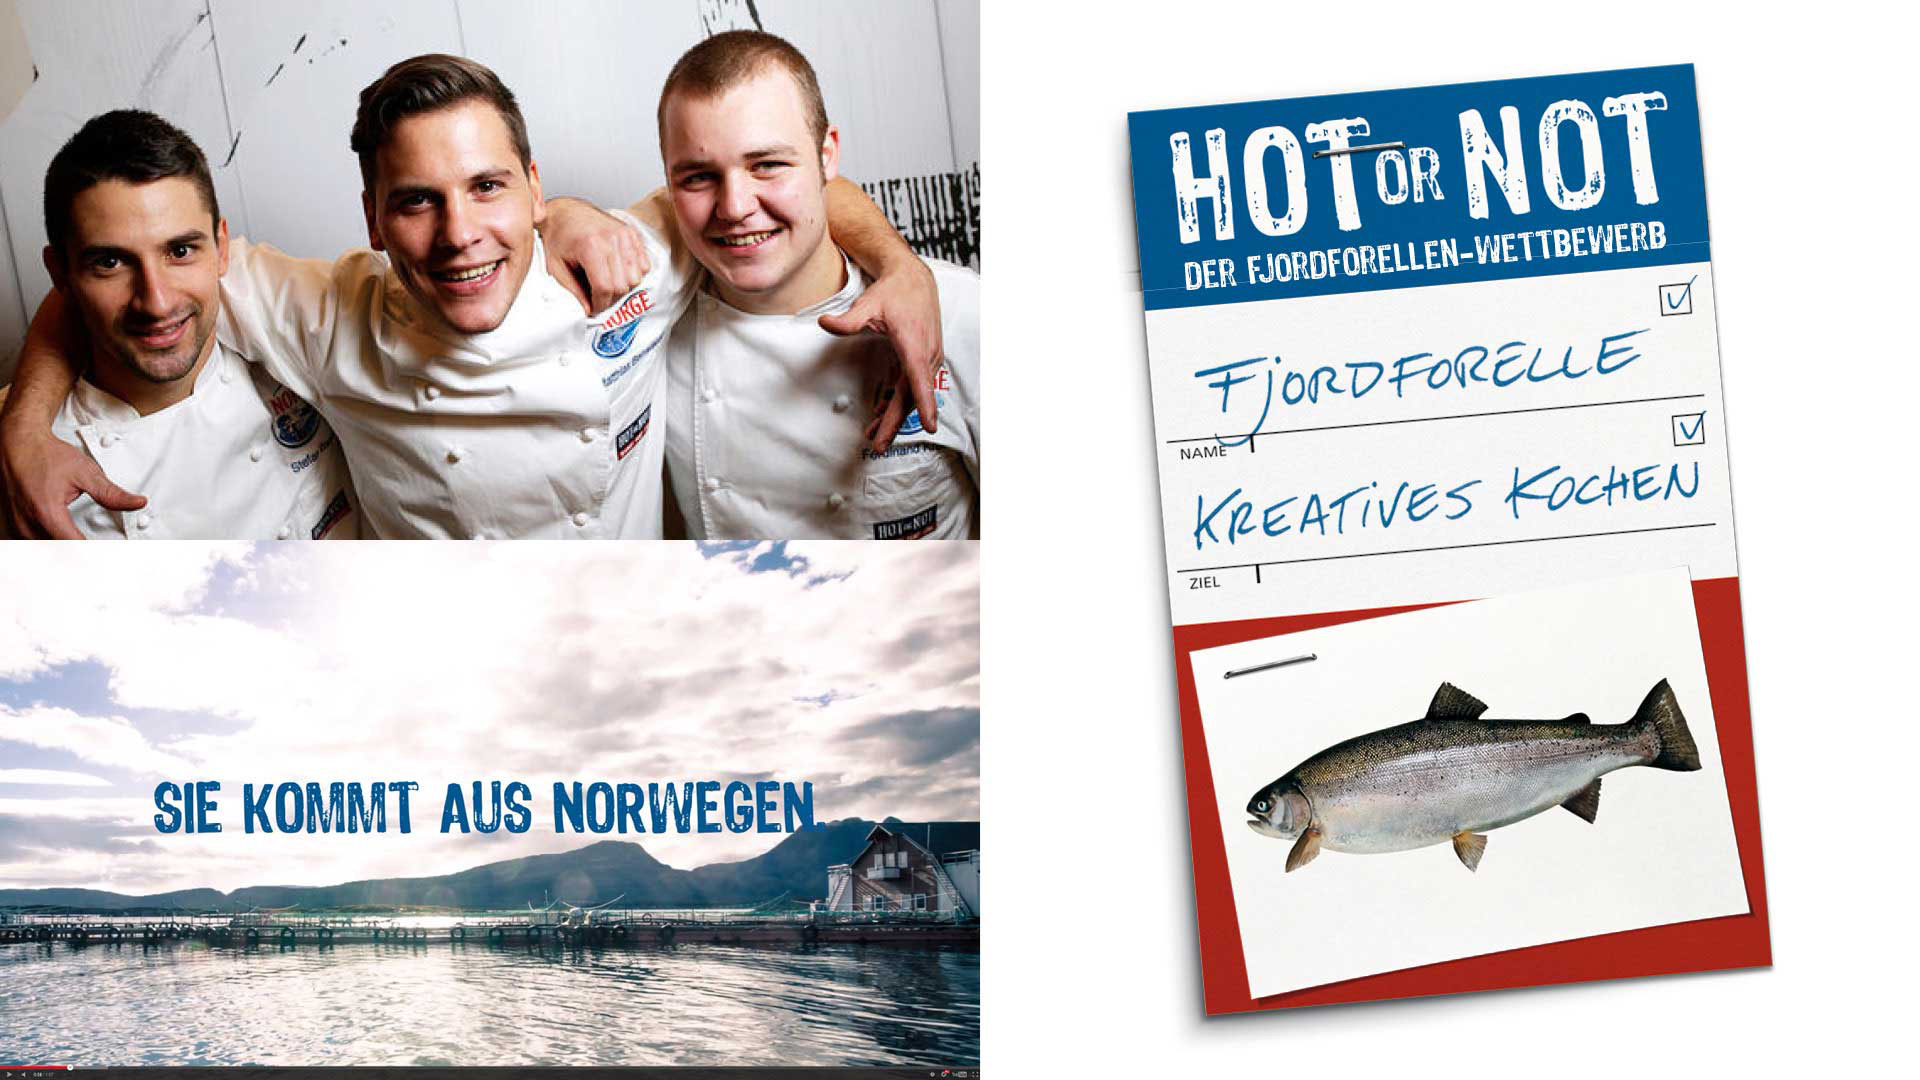 Three chefs in Norge jackets represent opinion leaders in Orange Council's contribution to the HOT-OR-NOT competition for fjord trout.